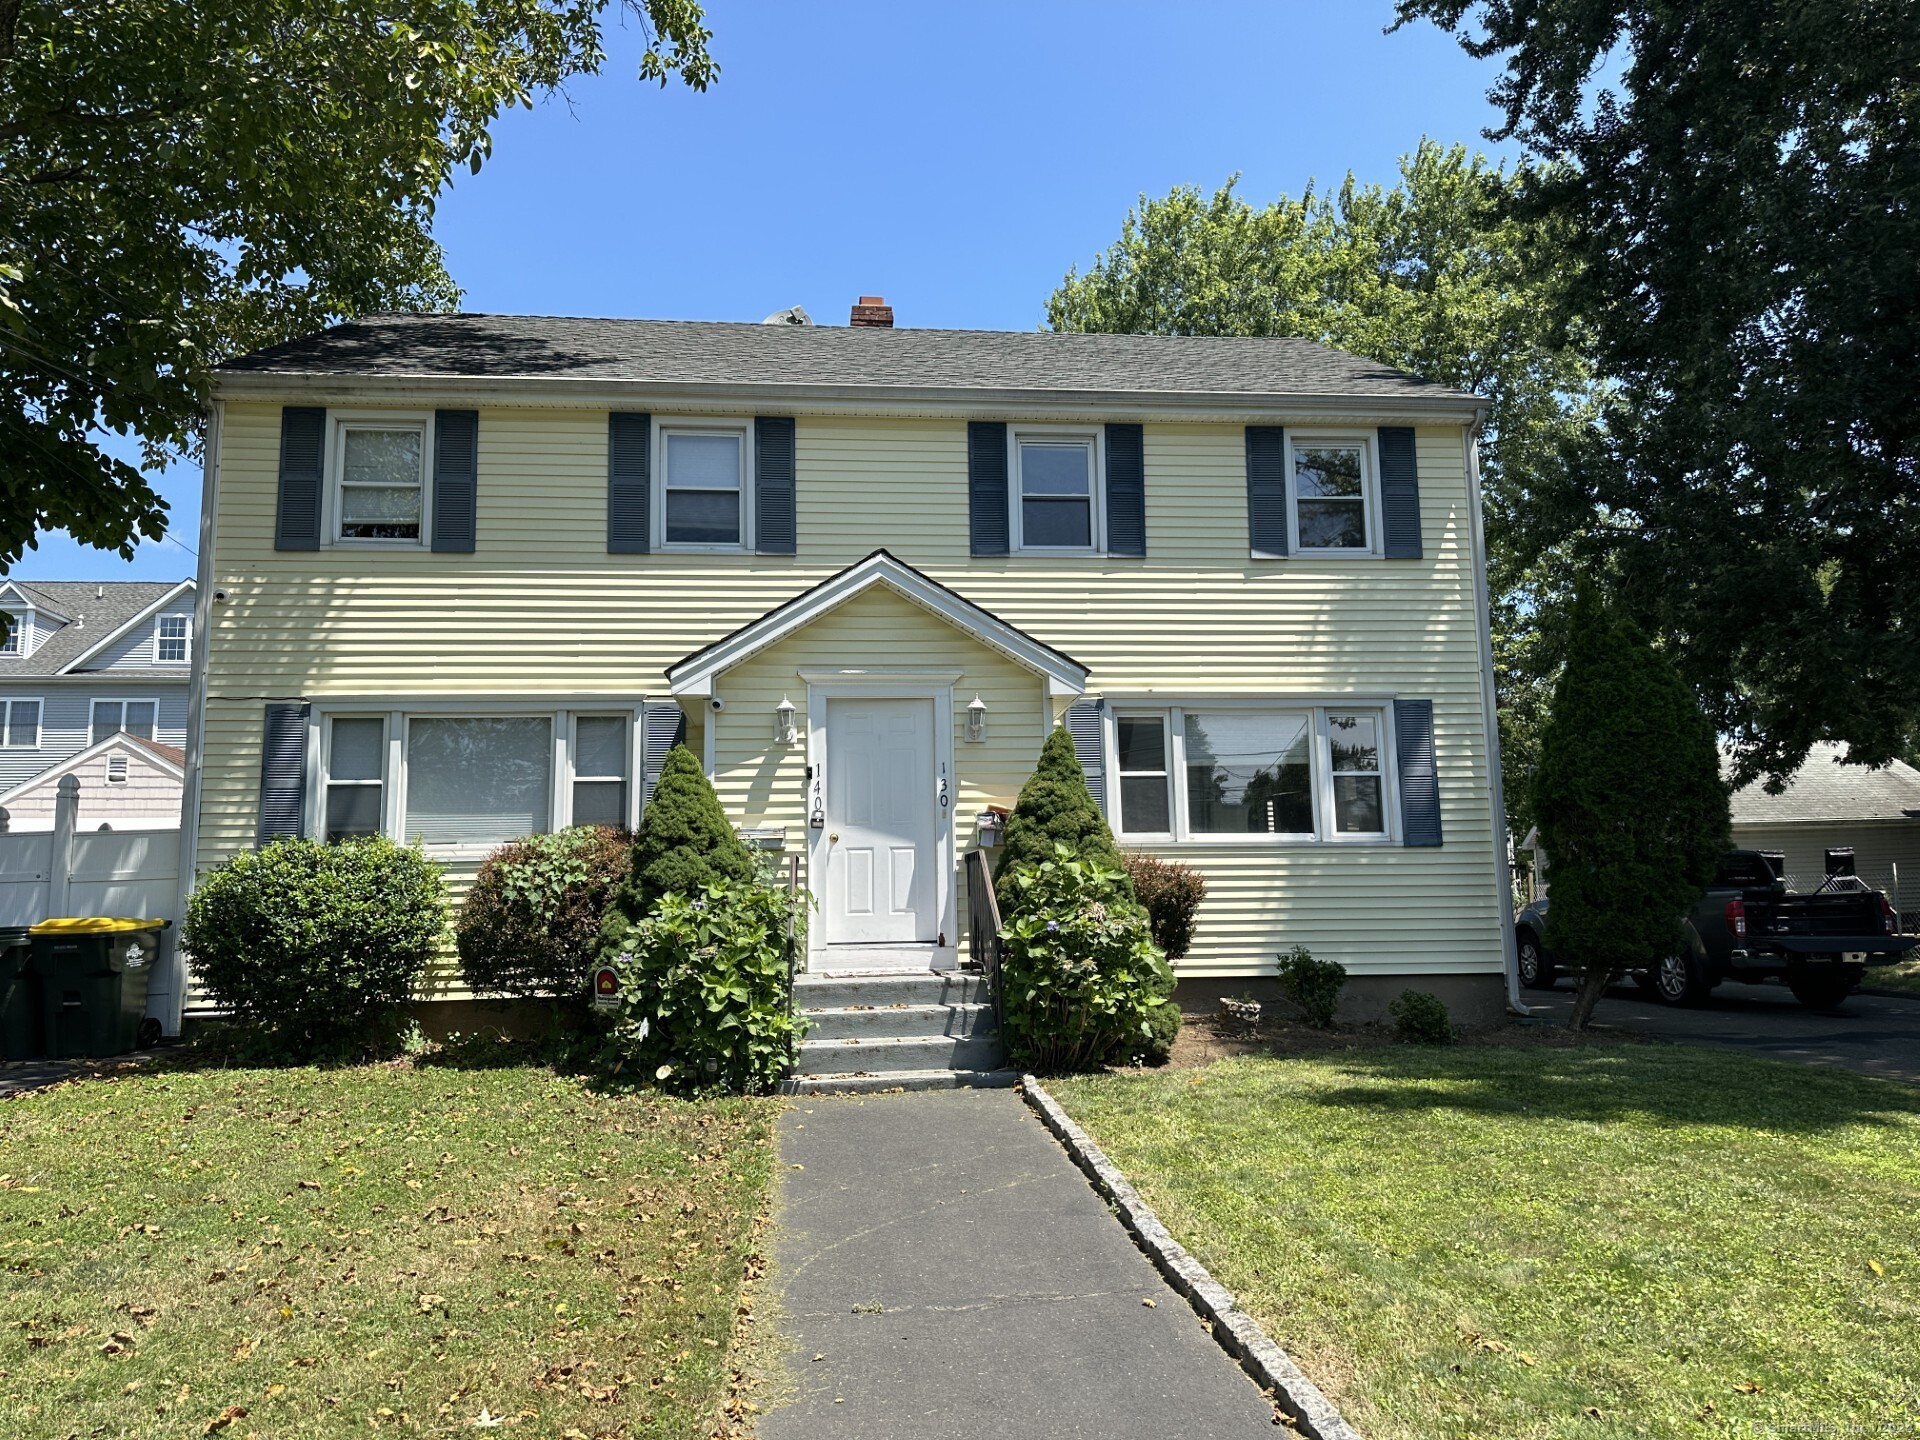 This wonerfully located 1/2 Duplex home was recently completely redone inside and out. Has nice size rooms and new kitchen and baths. Private rear deck and two car garage with plenty of off street parking as well on a cul du sac street.